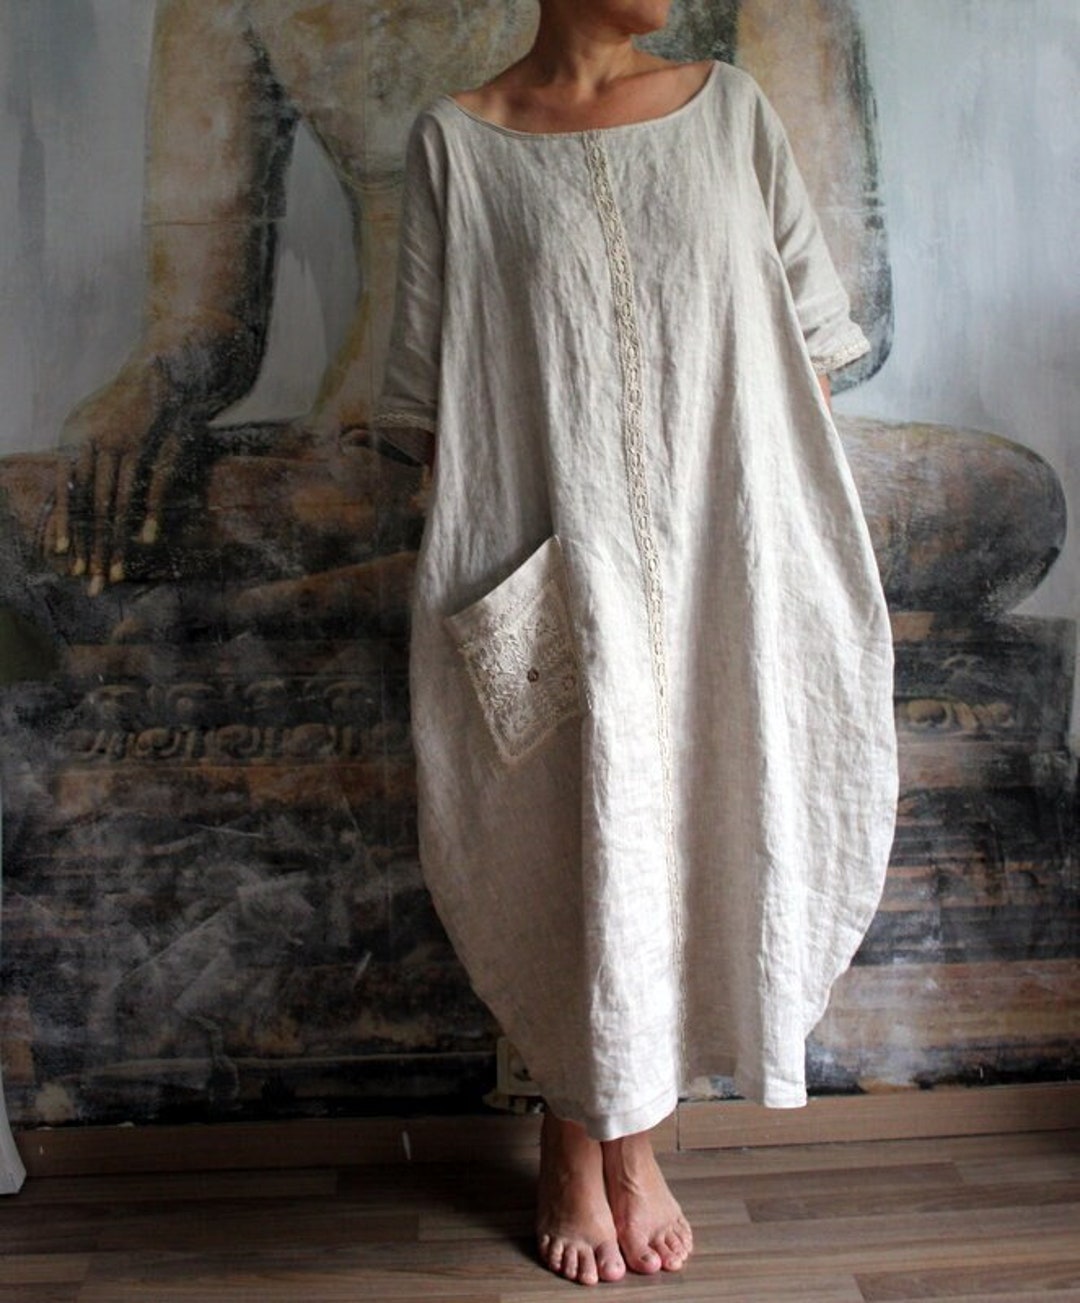 Embroidered Linen Dress.natural Linen Color With Related Element.linen ...